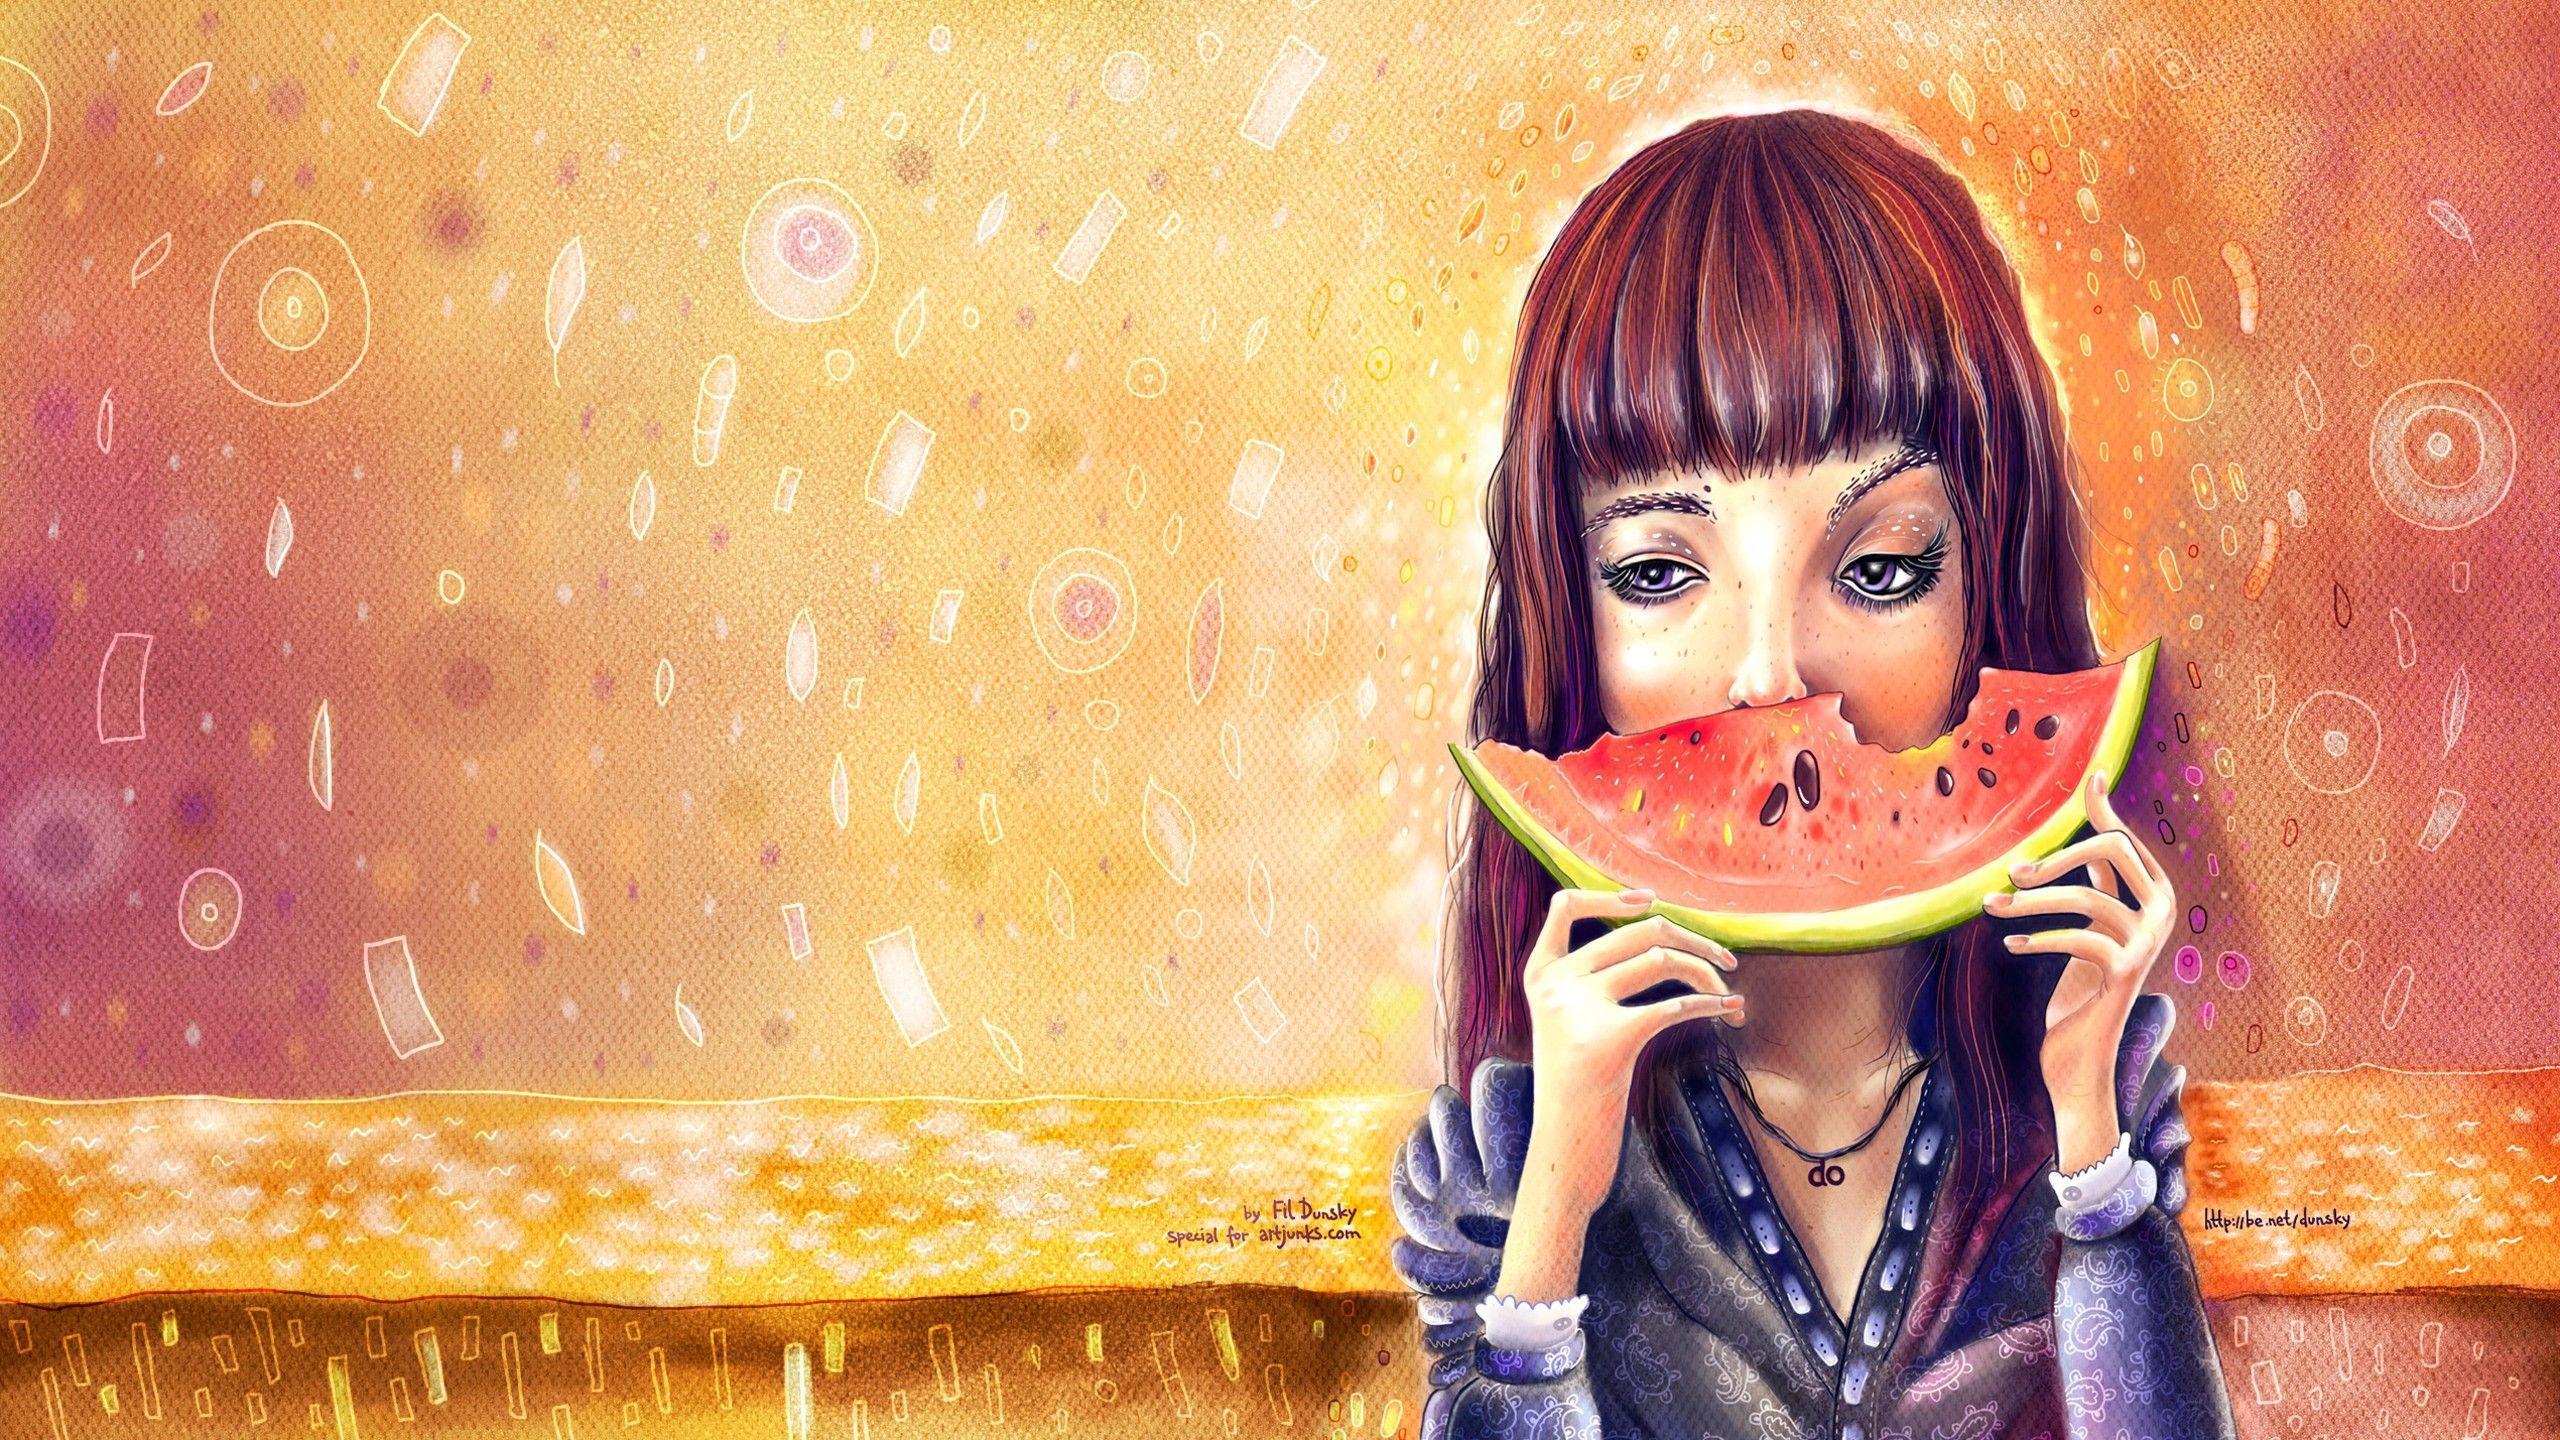 Girl eating watermelon wallpaper and image